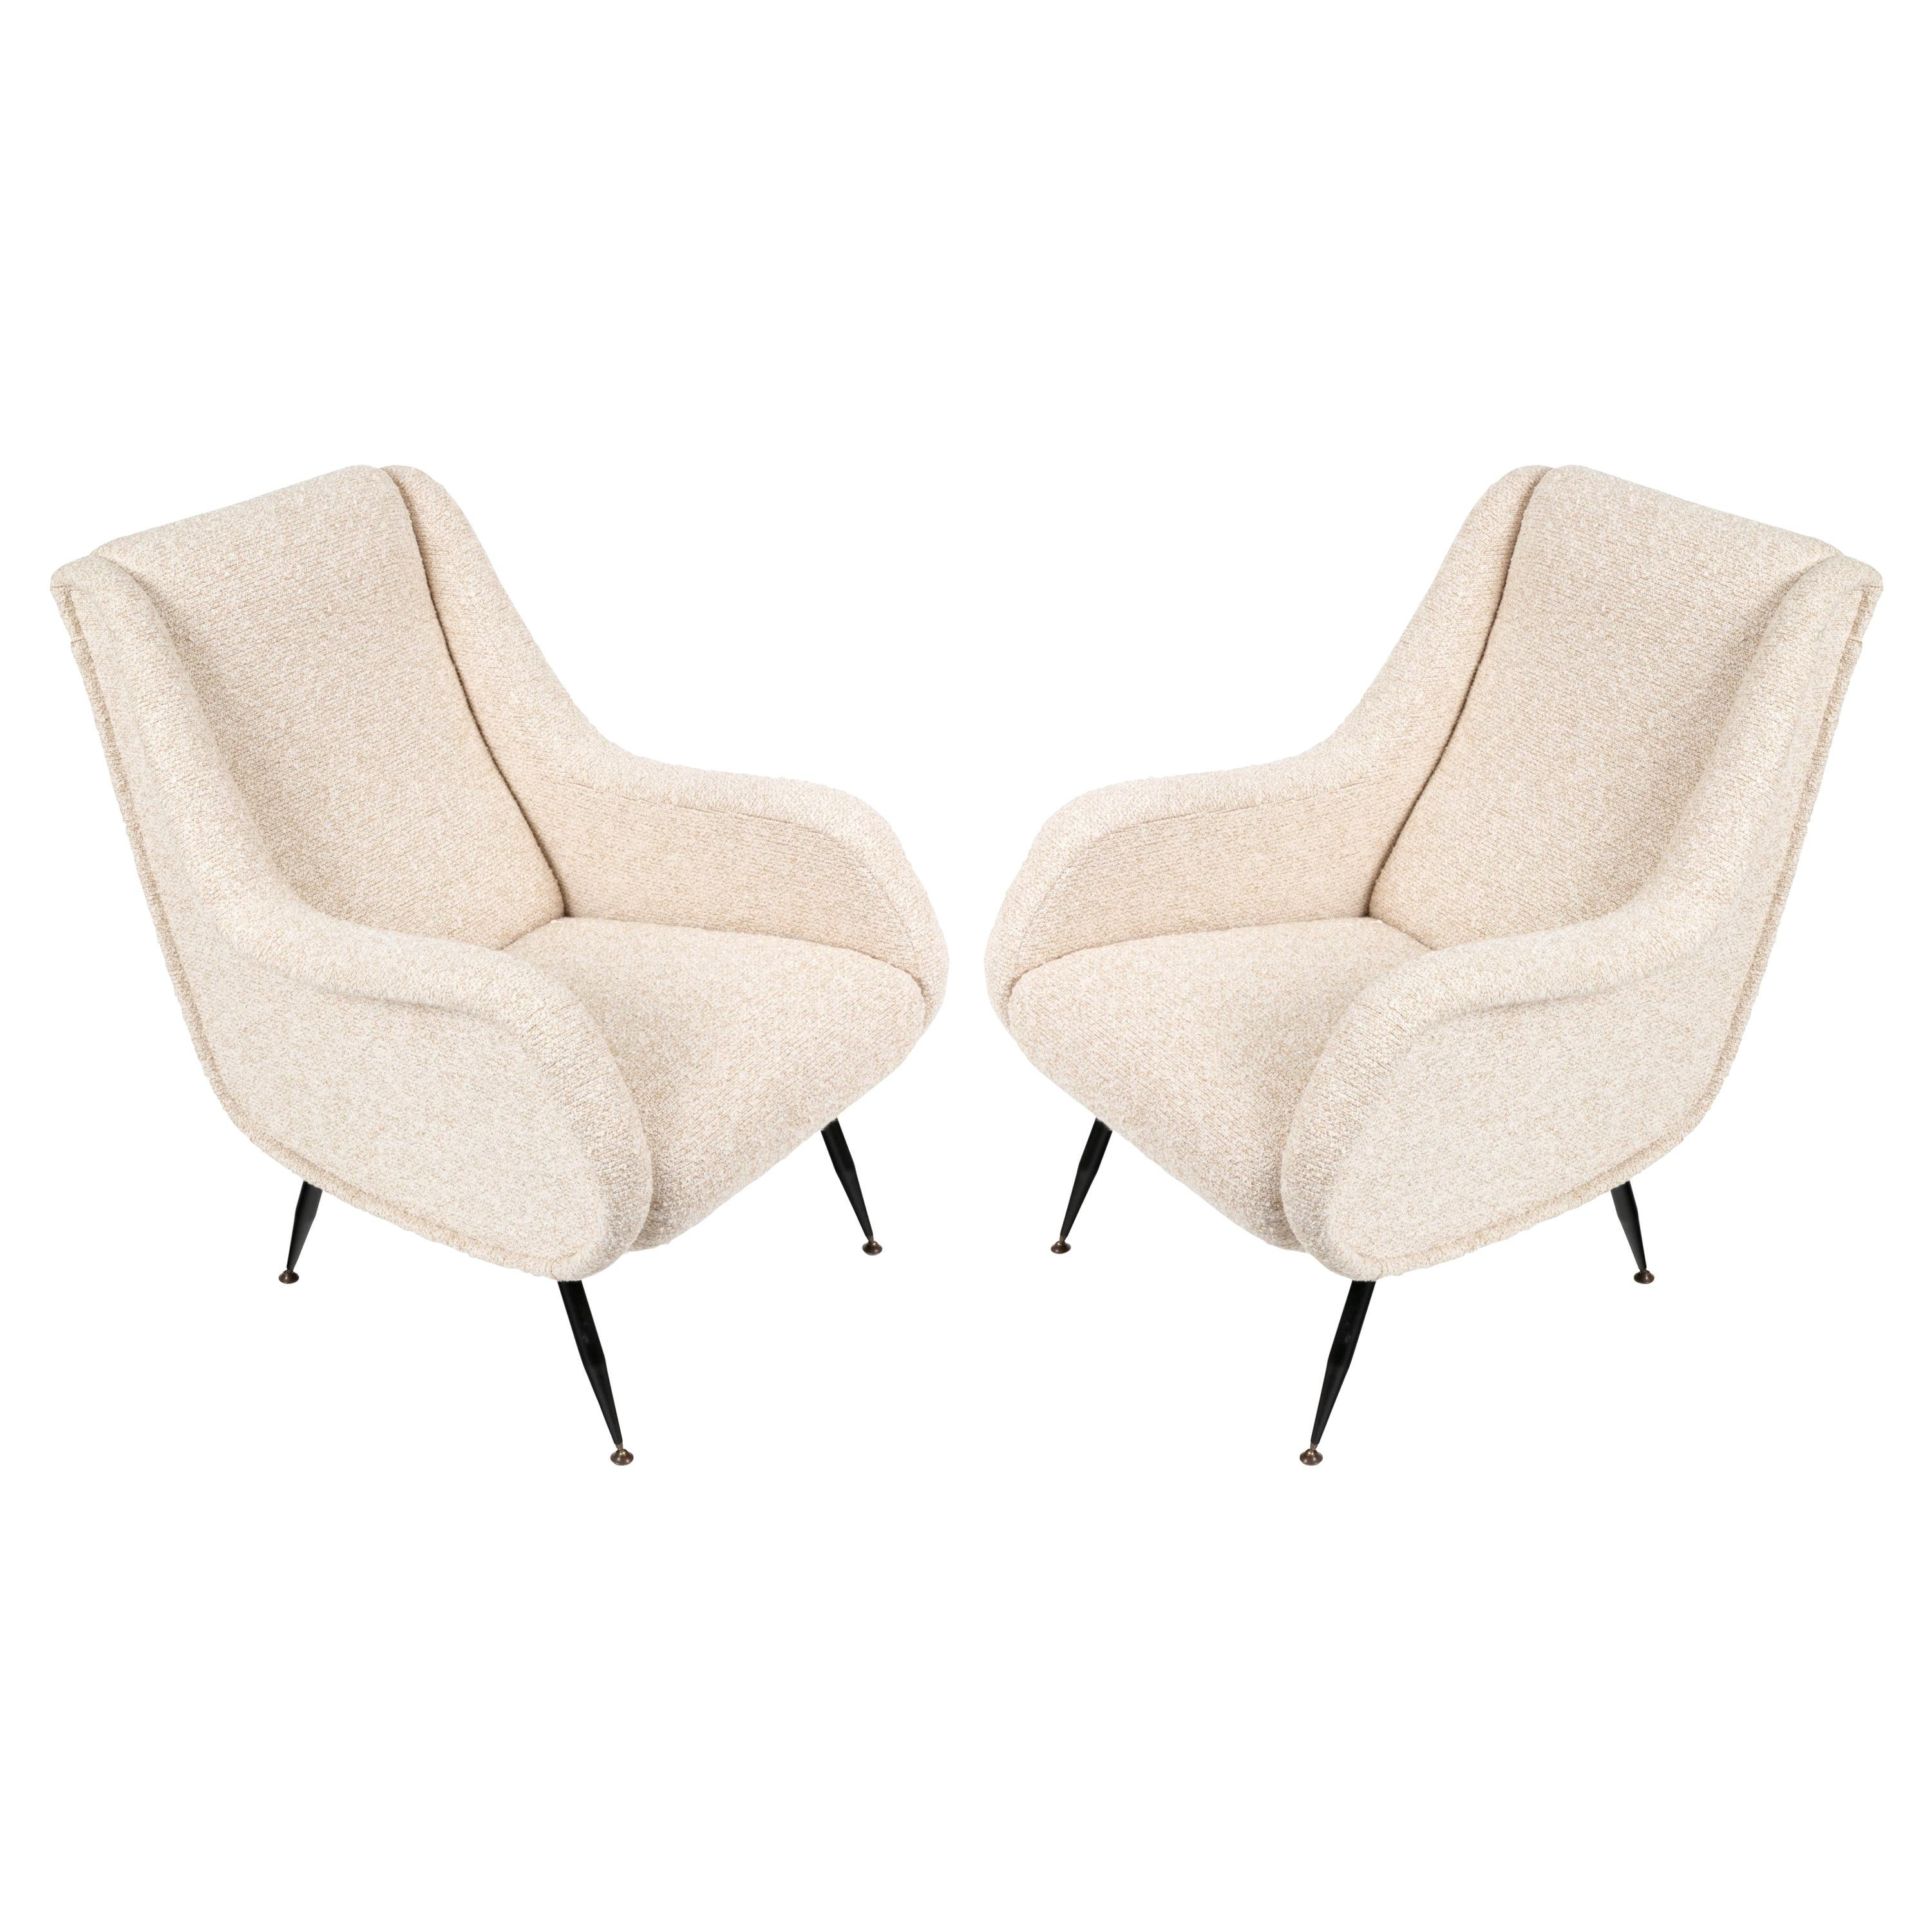 Pair of Mid-Century Modern Italian Lounge Chairs in White Fabric, Italy 1950s